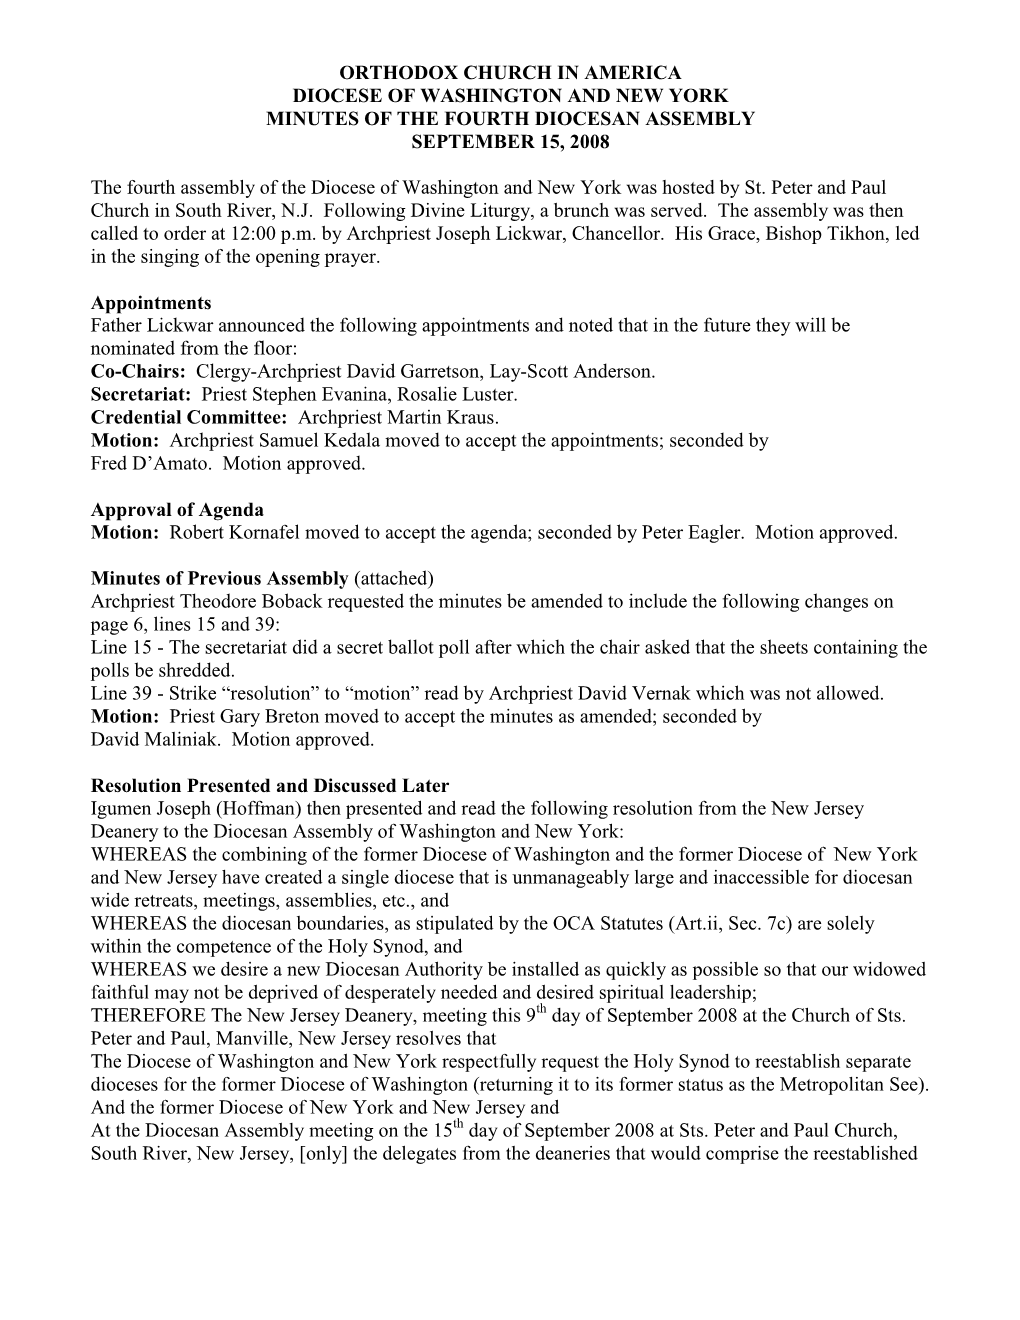 Orthodox Church in America Diocese of Washington and New York Minutes of the Fourth Diocesan Assembly September 15, 2008